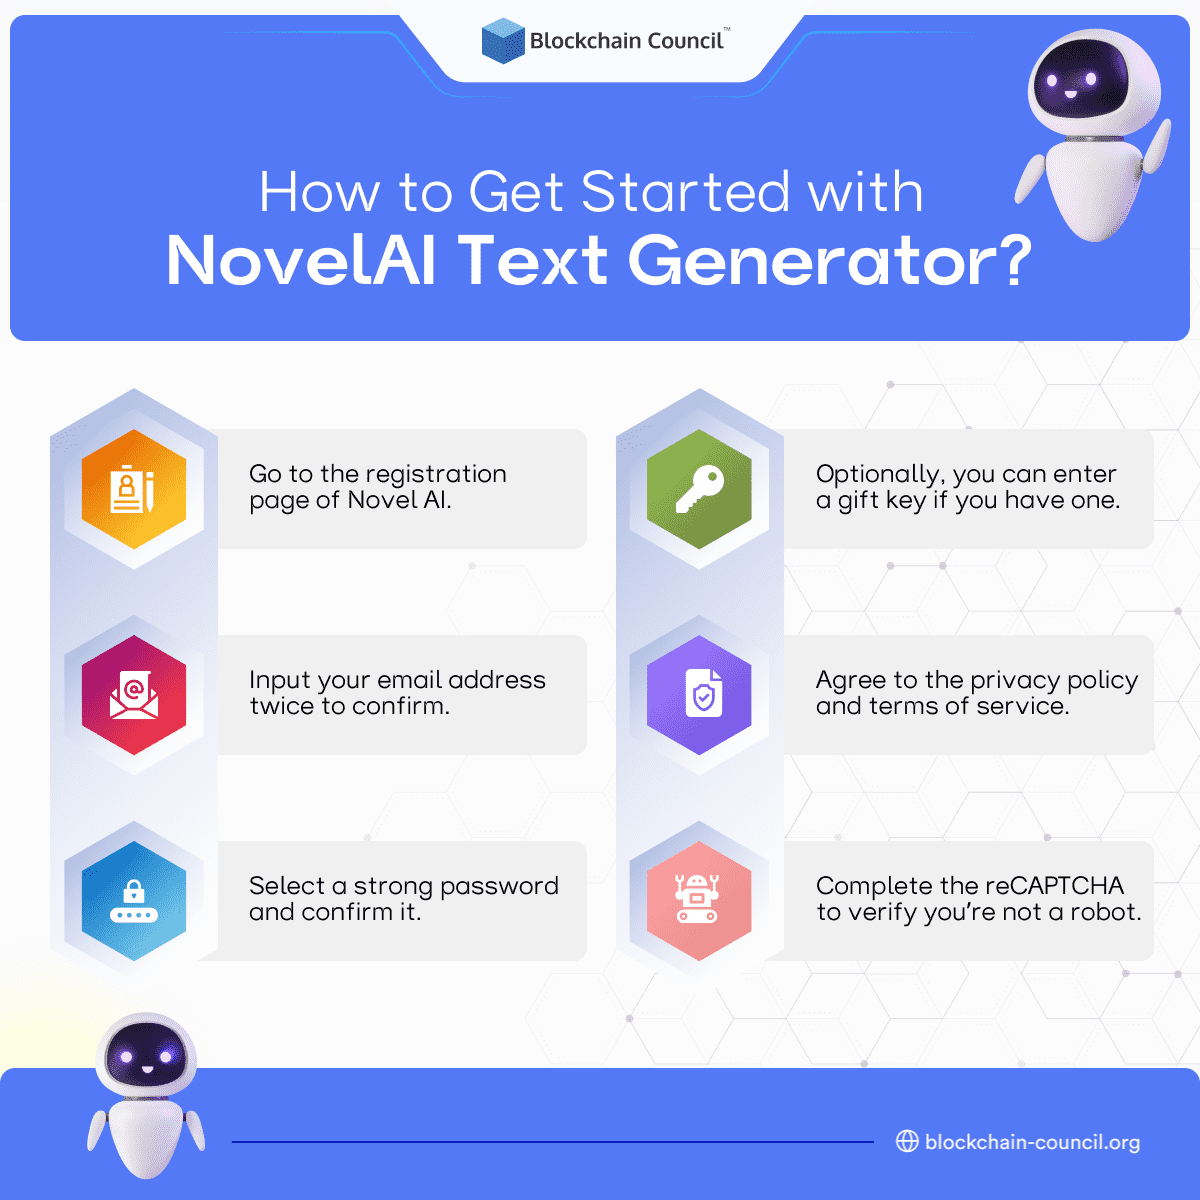 Getting Started with NovelAI Text Generator